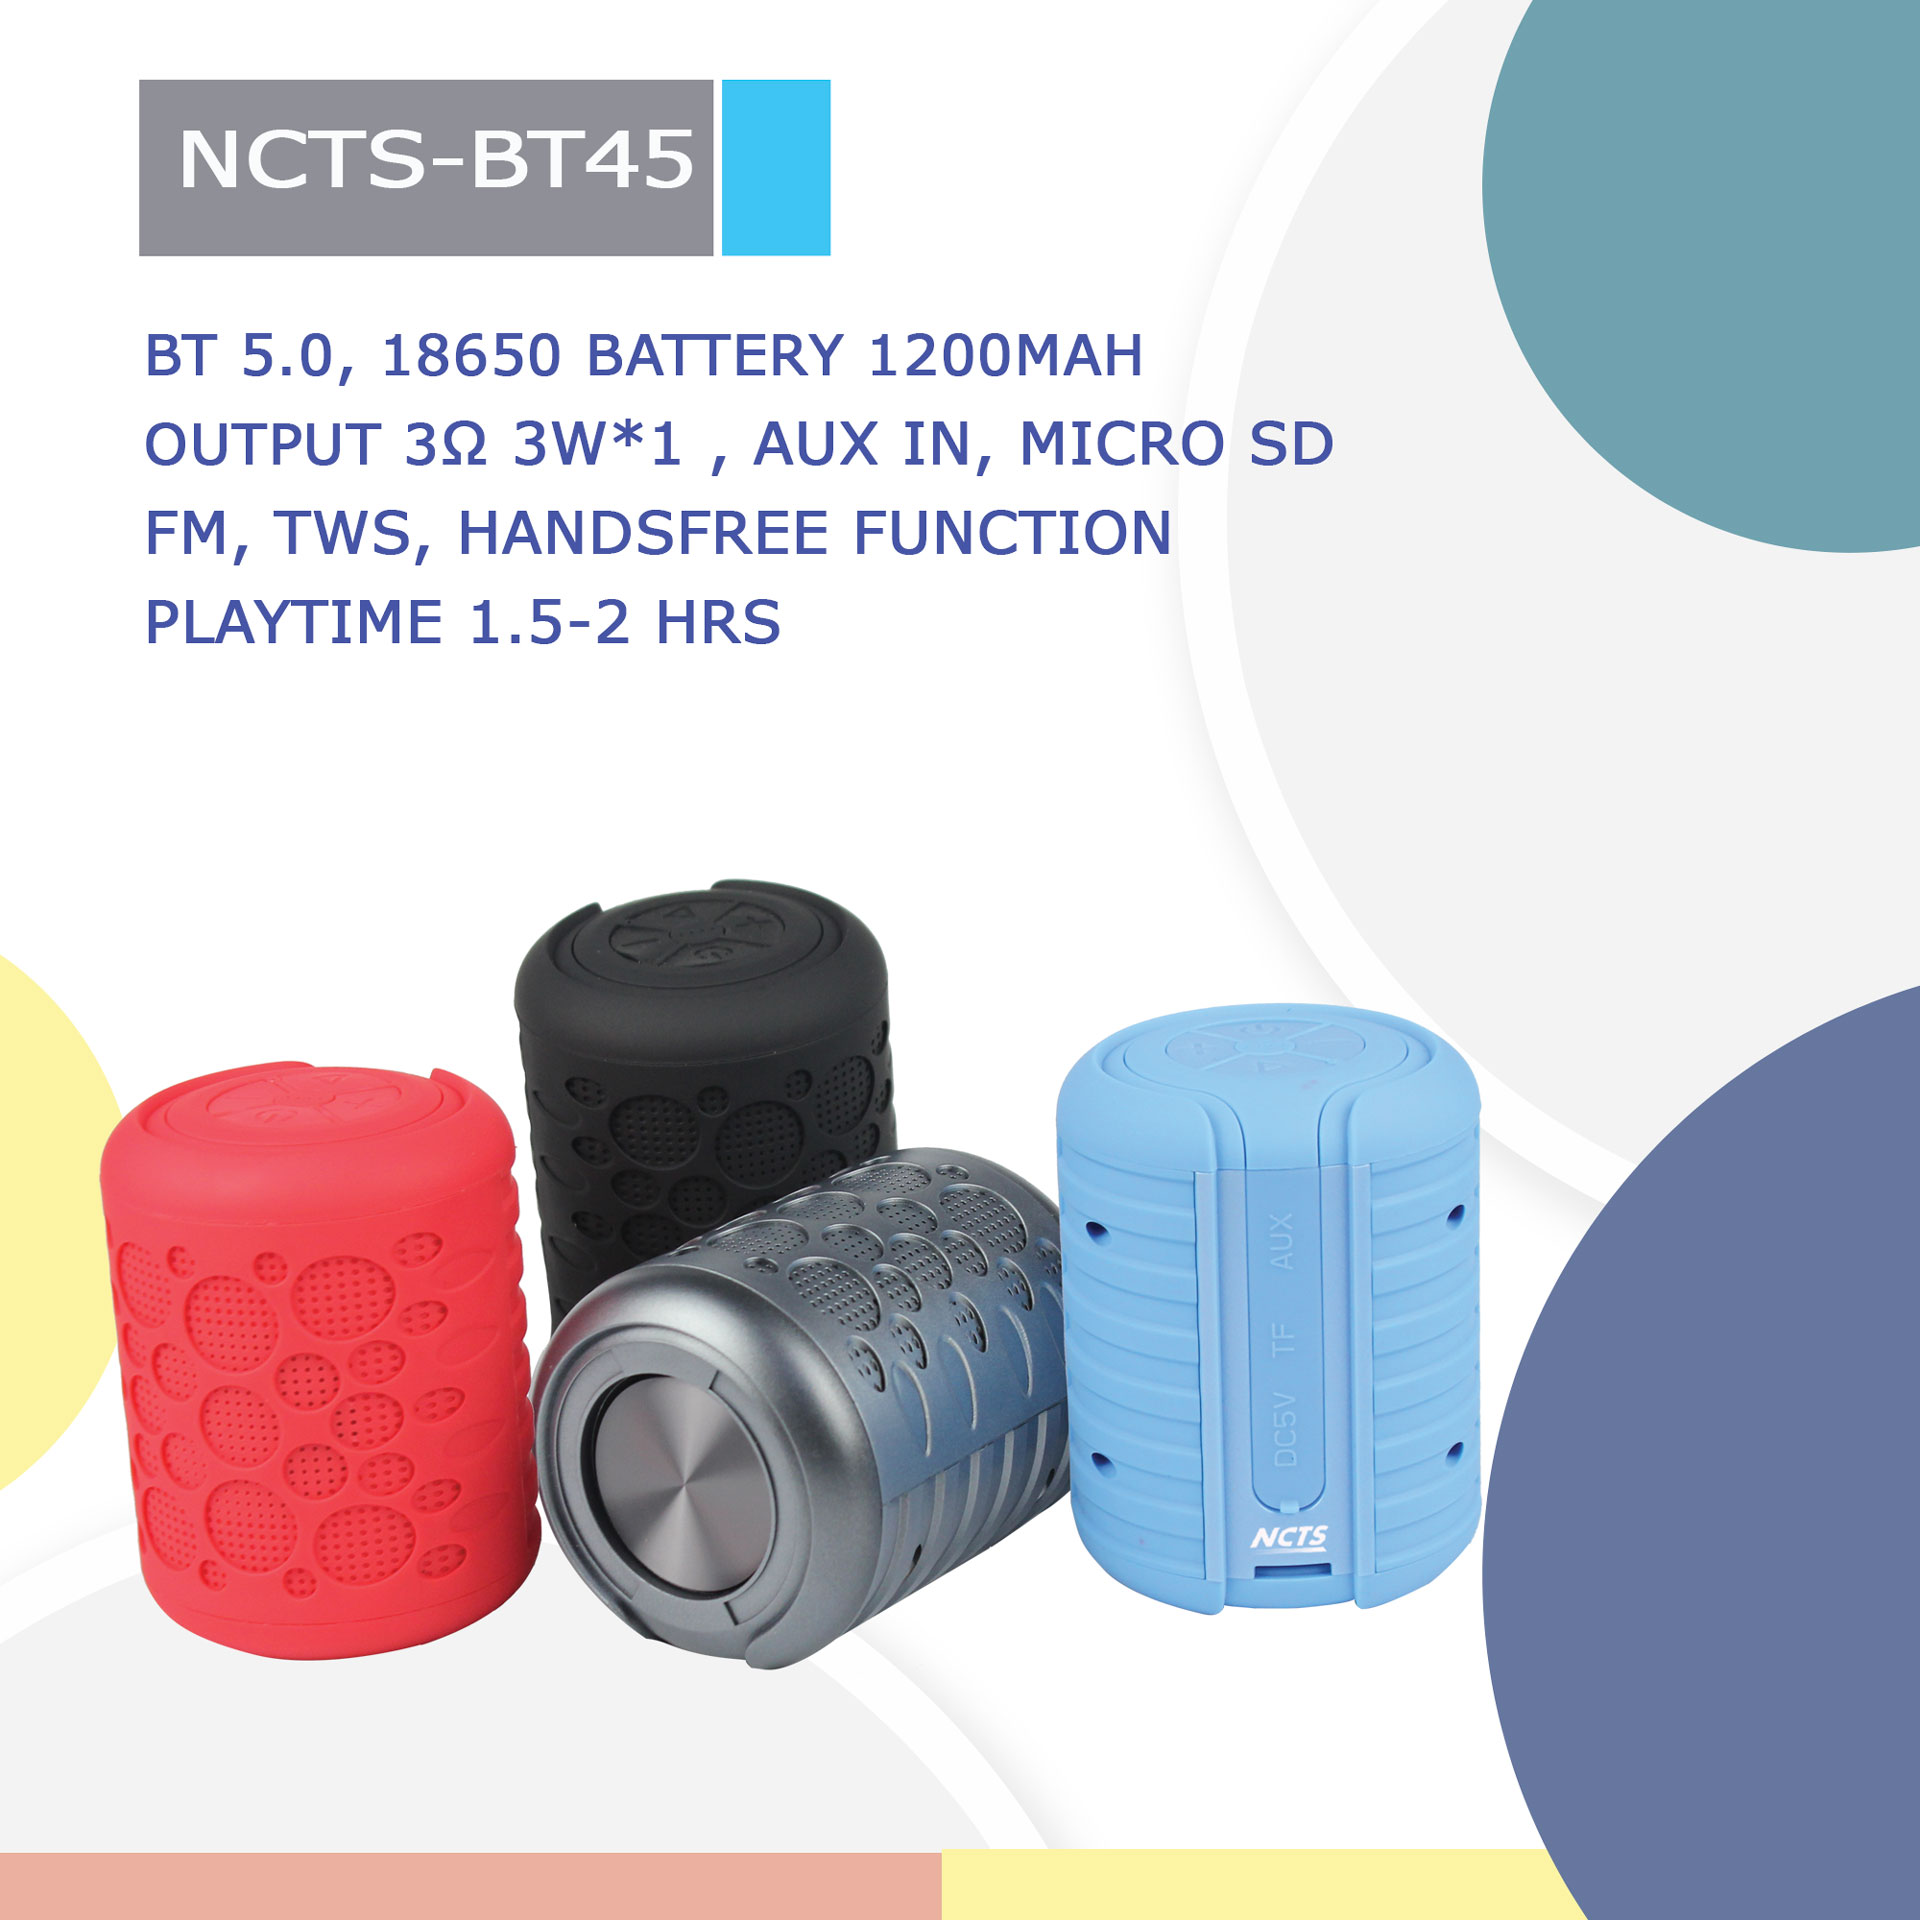 NCTS-BT45